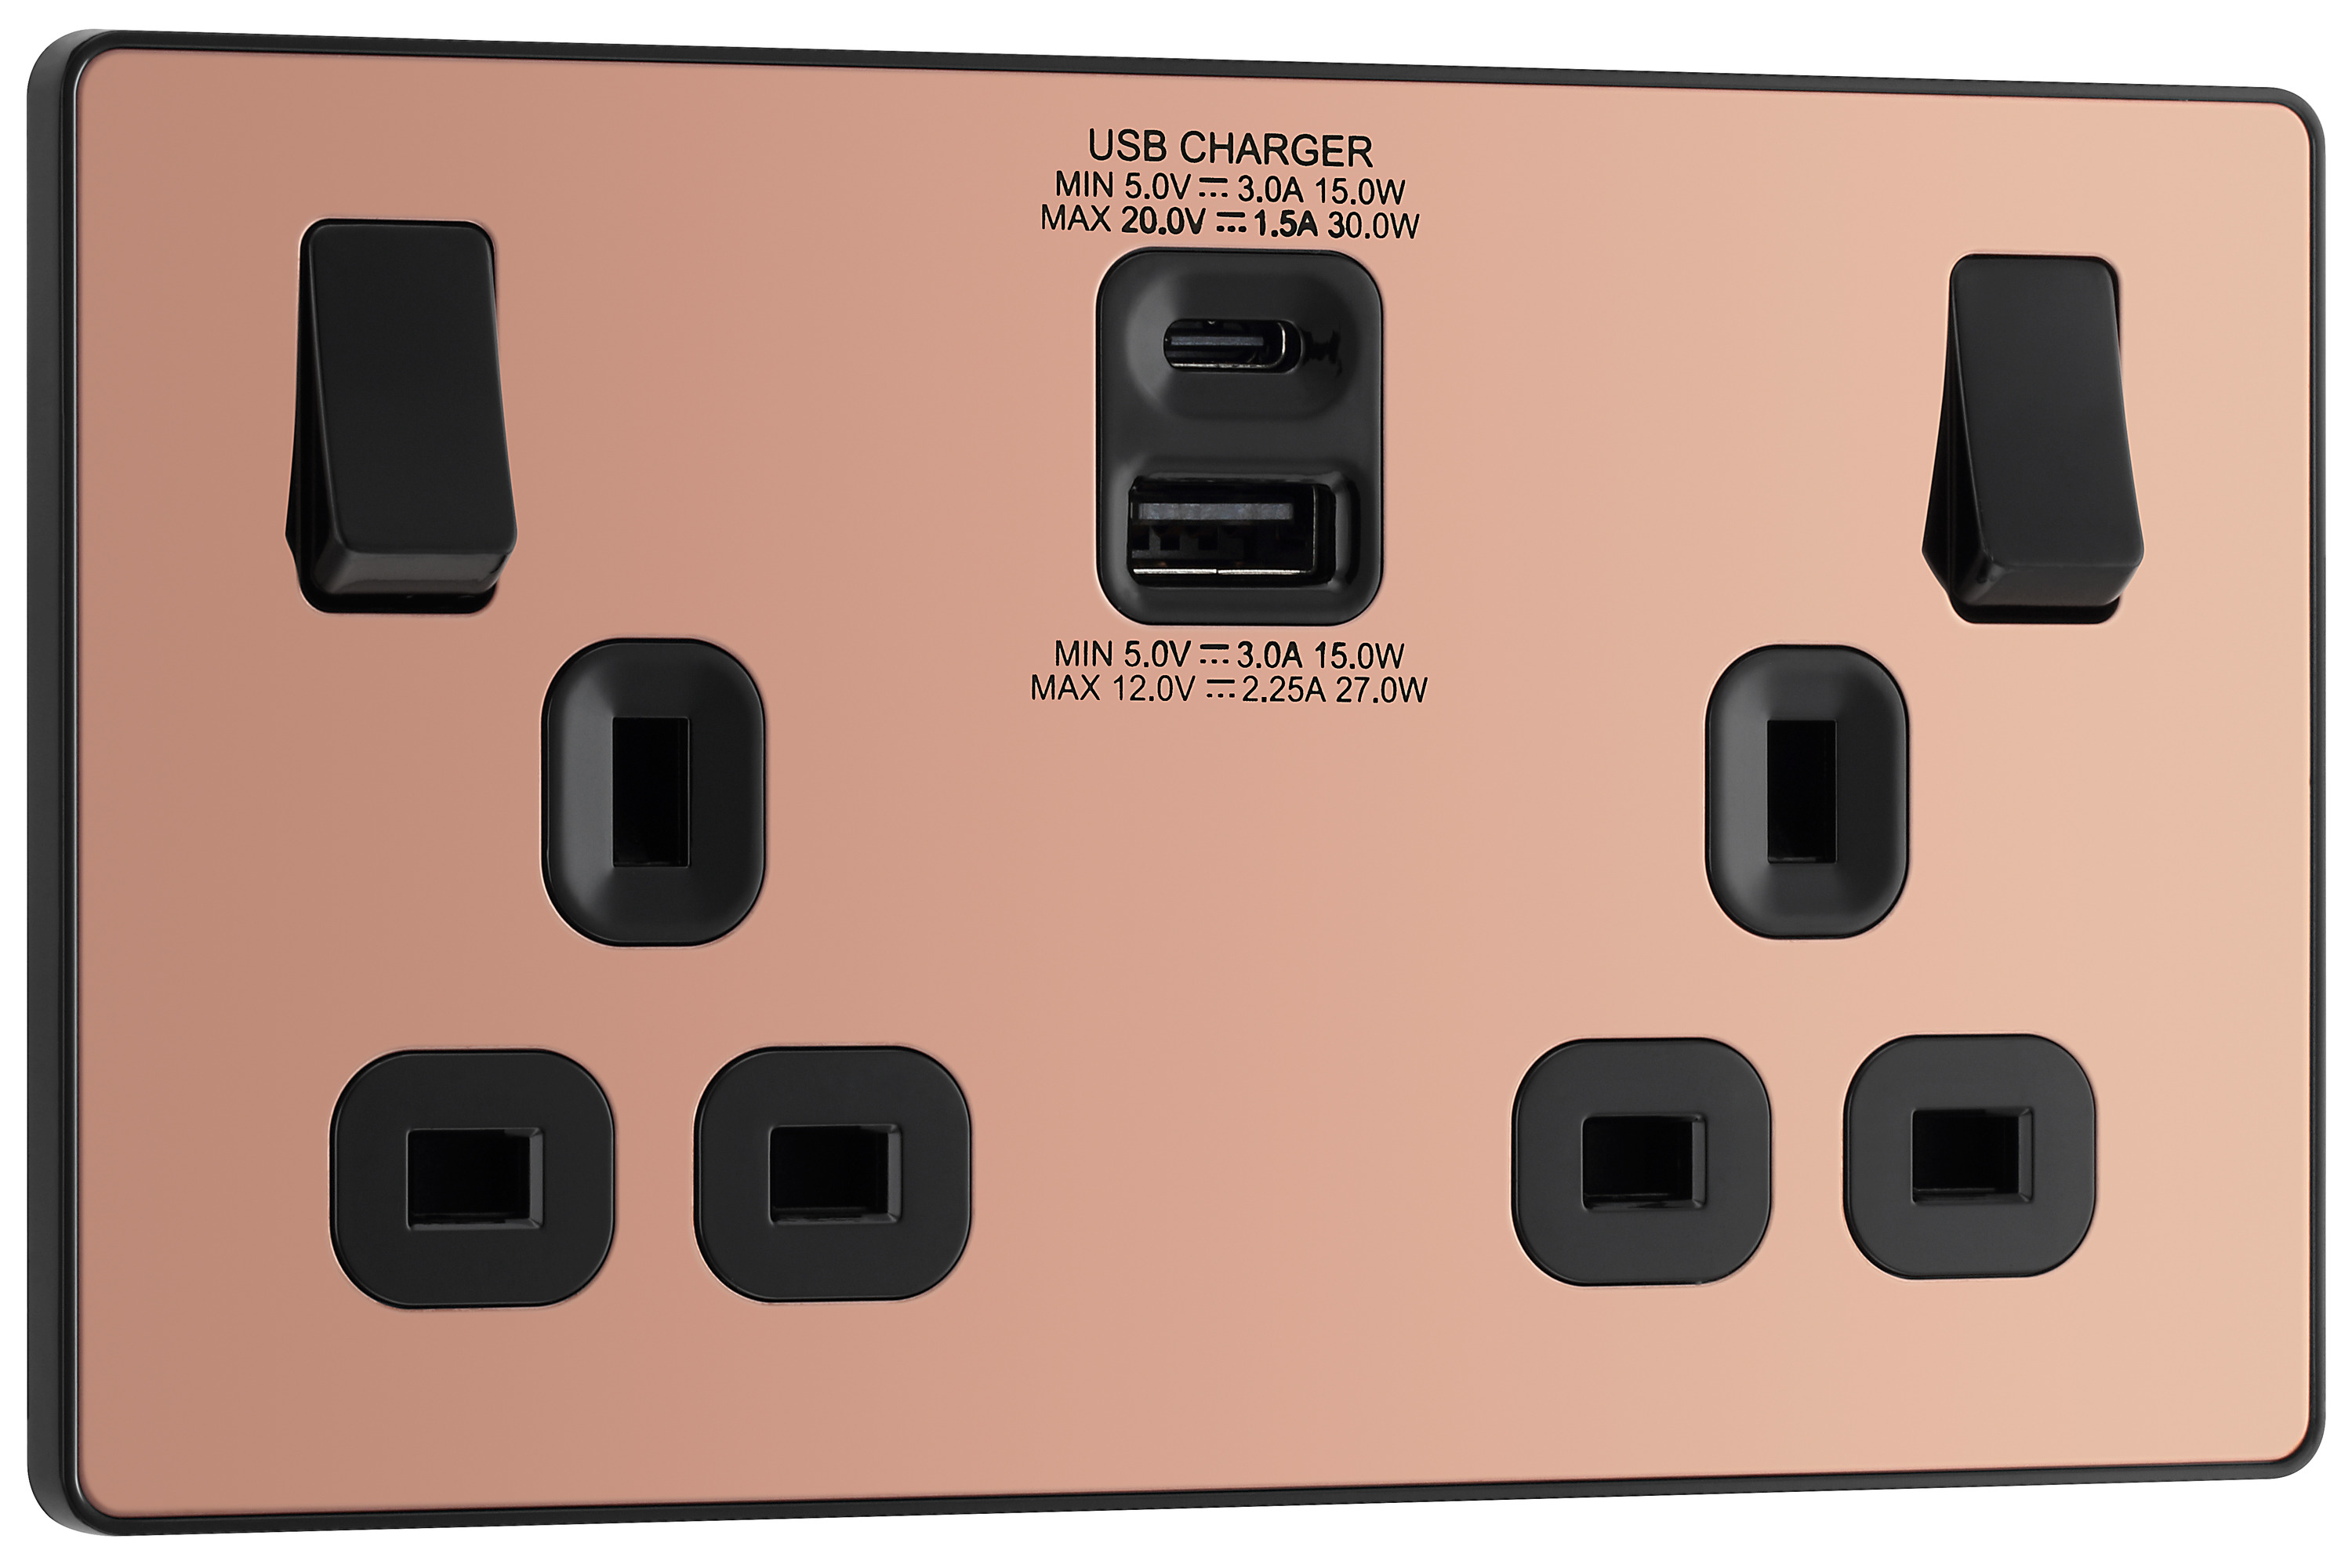 BG Evolve Double Switched 13A Power Socket with USB C 30W & USB A (2.1A) - Polished Copper